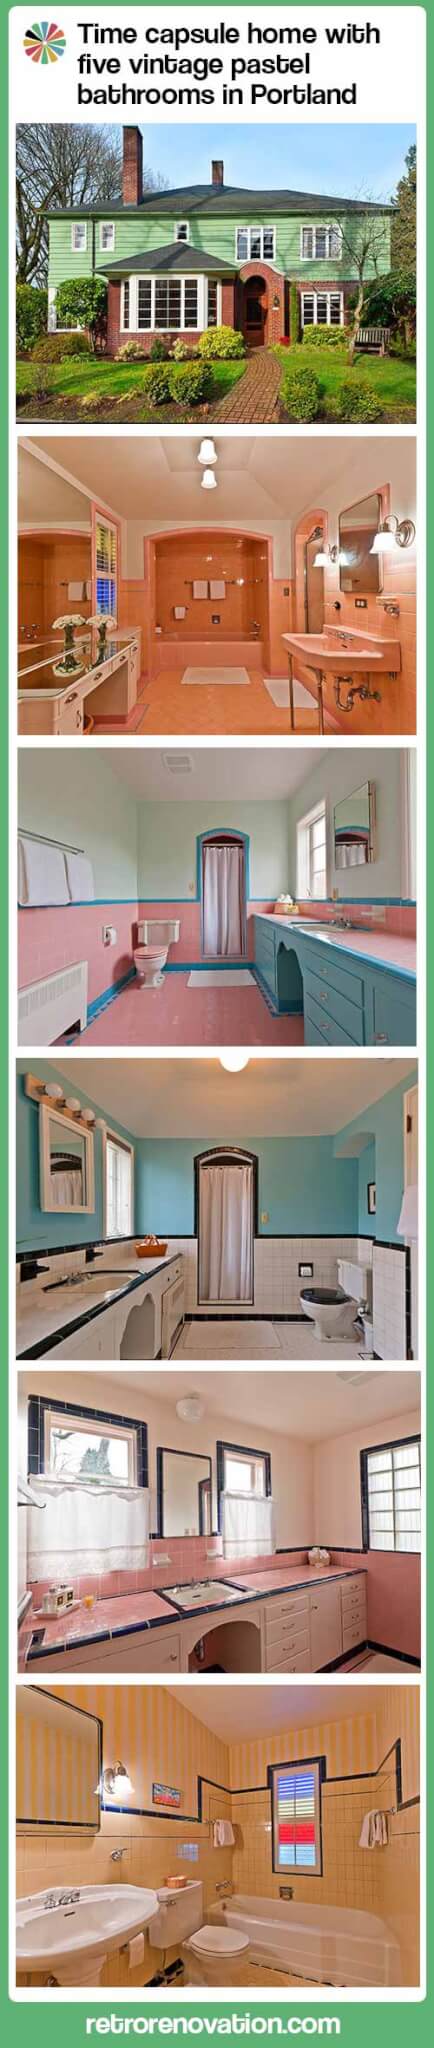 Portland-time-capsule-with-five-pastel-baths